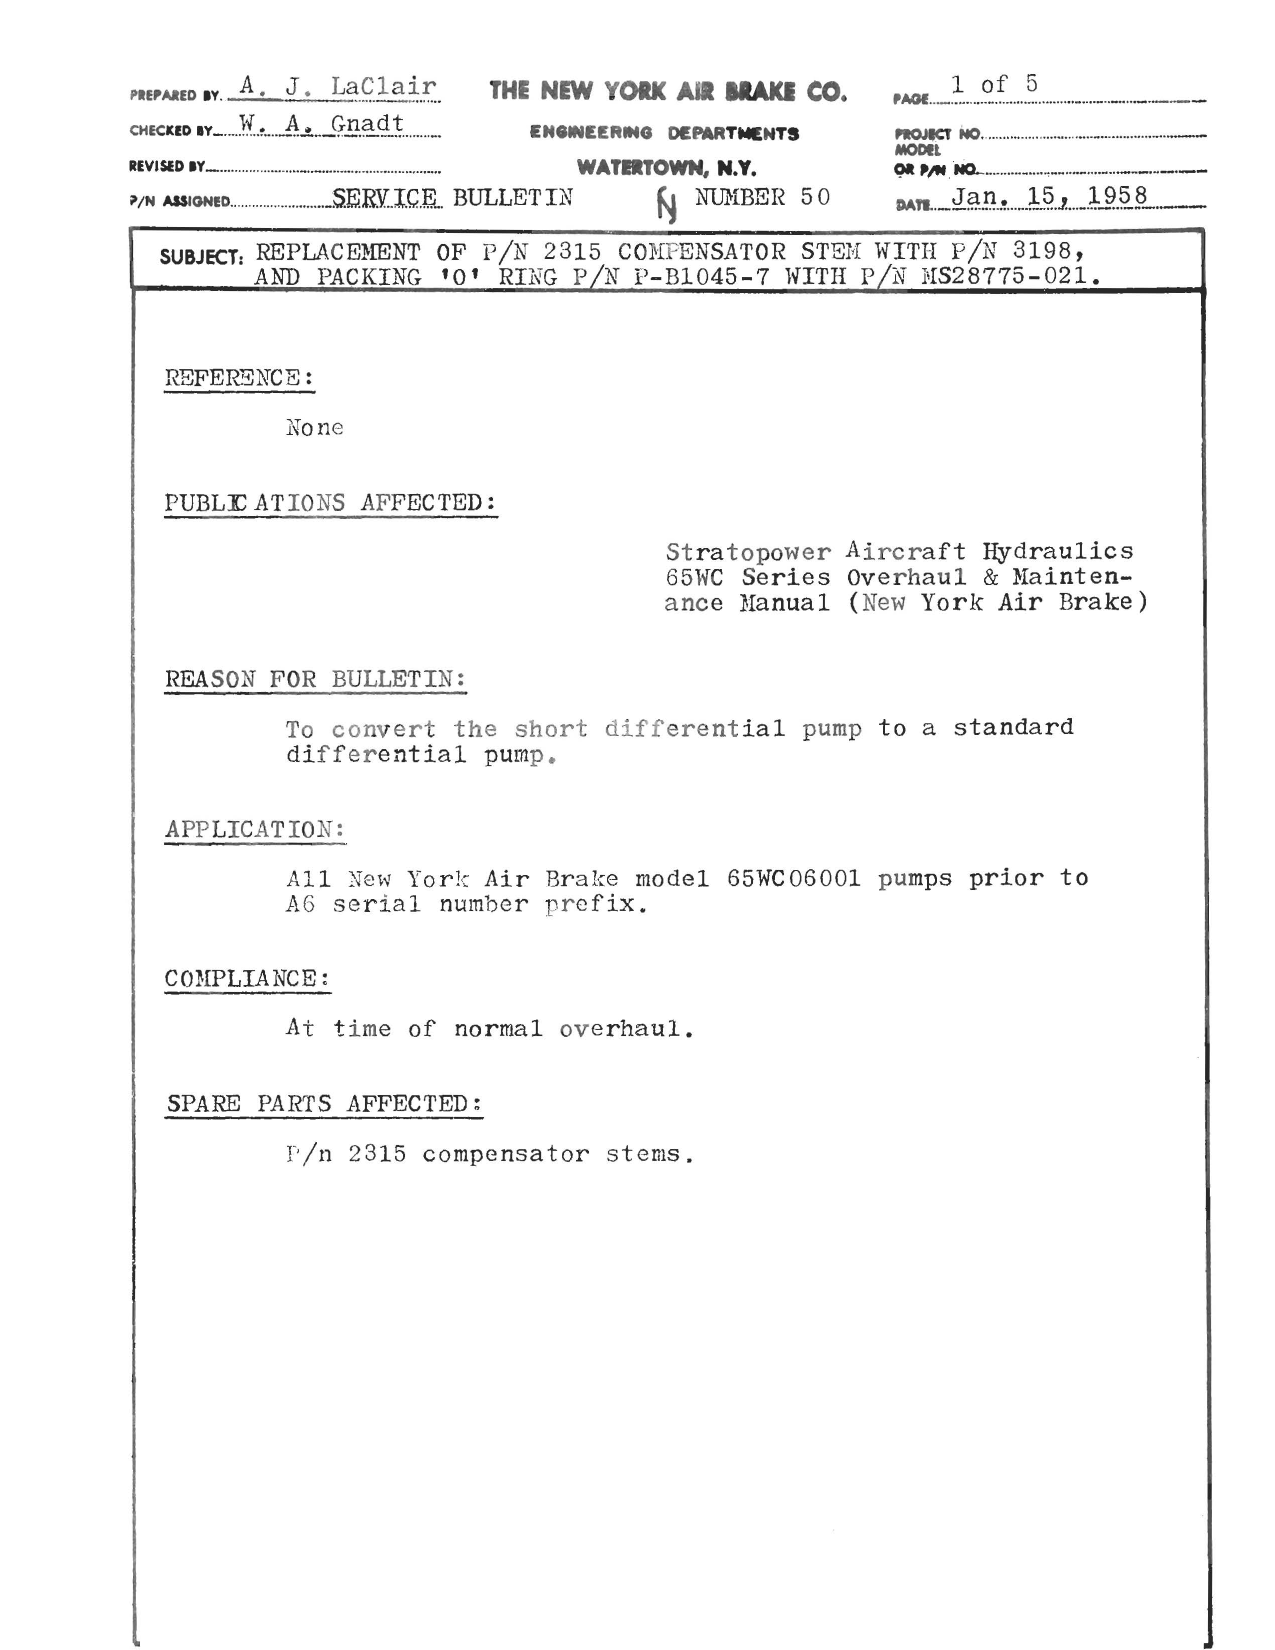 Sample page 1 from AirCorps Library document: Replacement of Part 2315 Compensator Stem with Part 3198 and Packing O Ring Part P-B1045-7 with MS28775-021